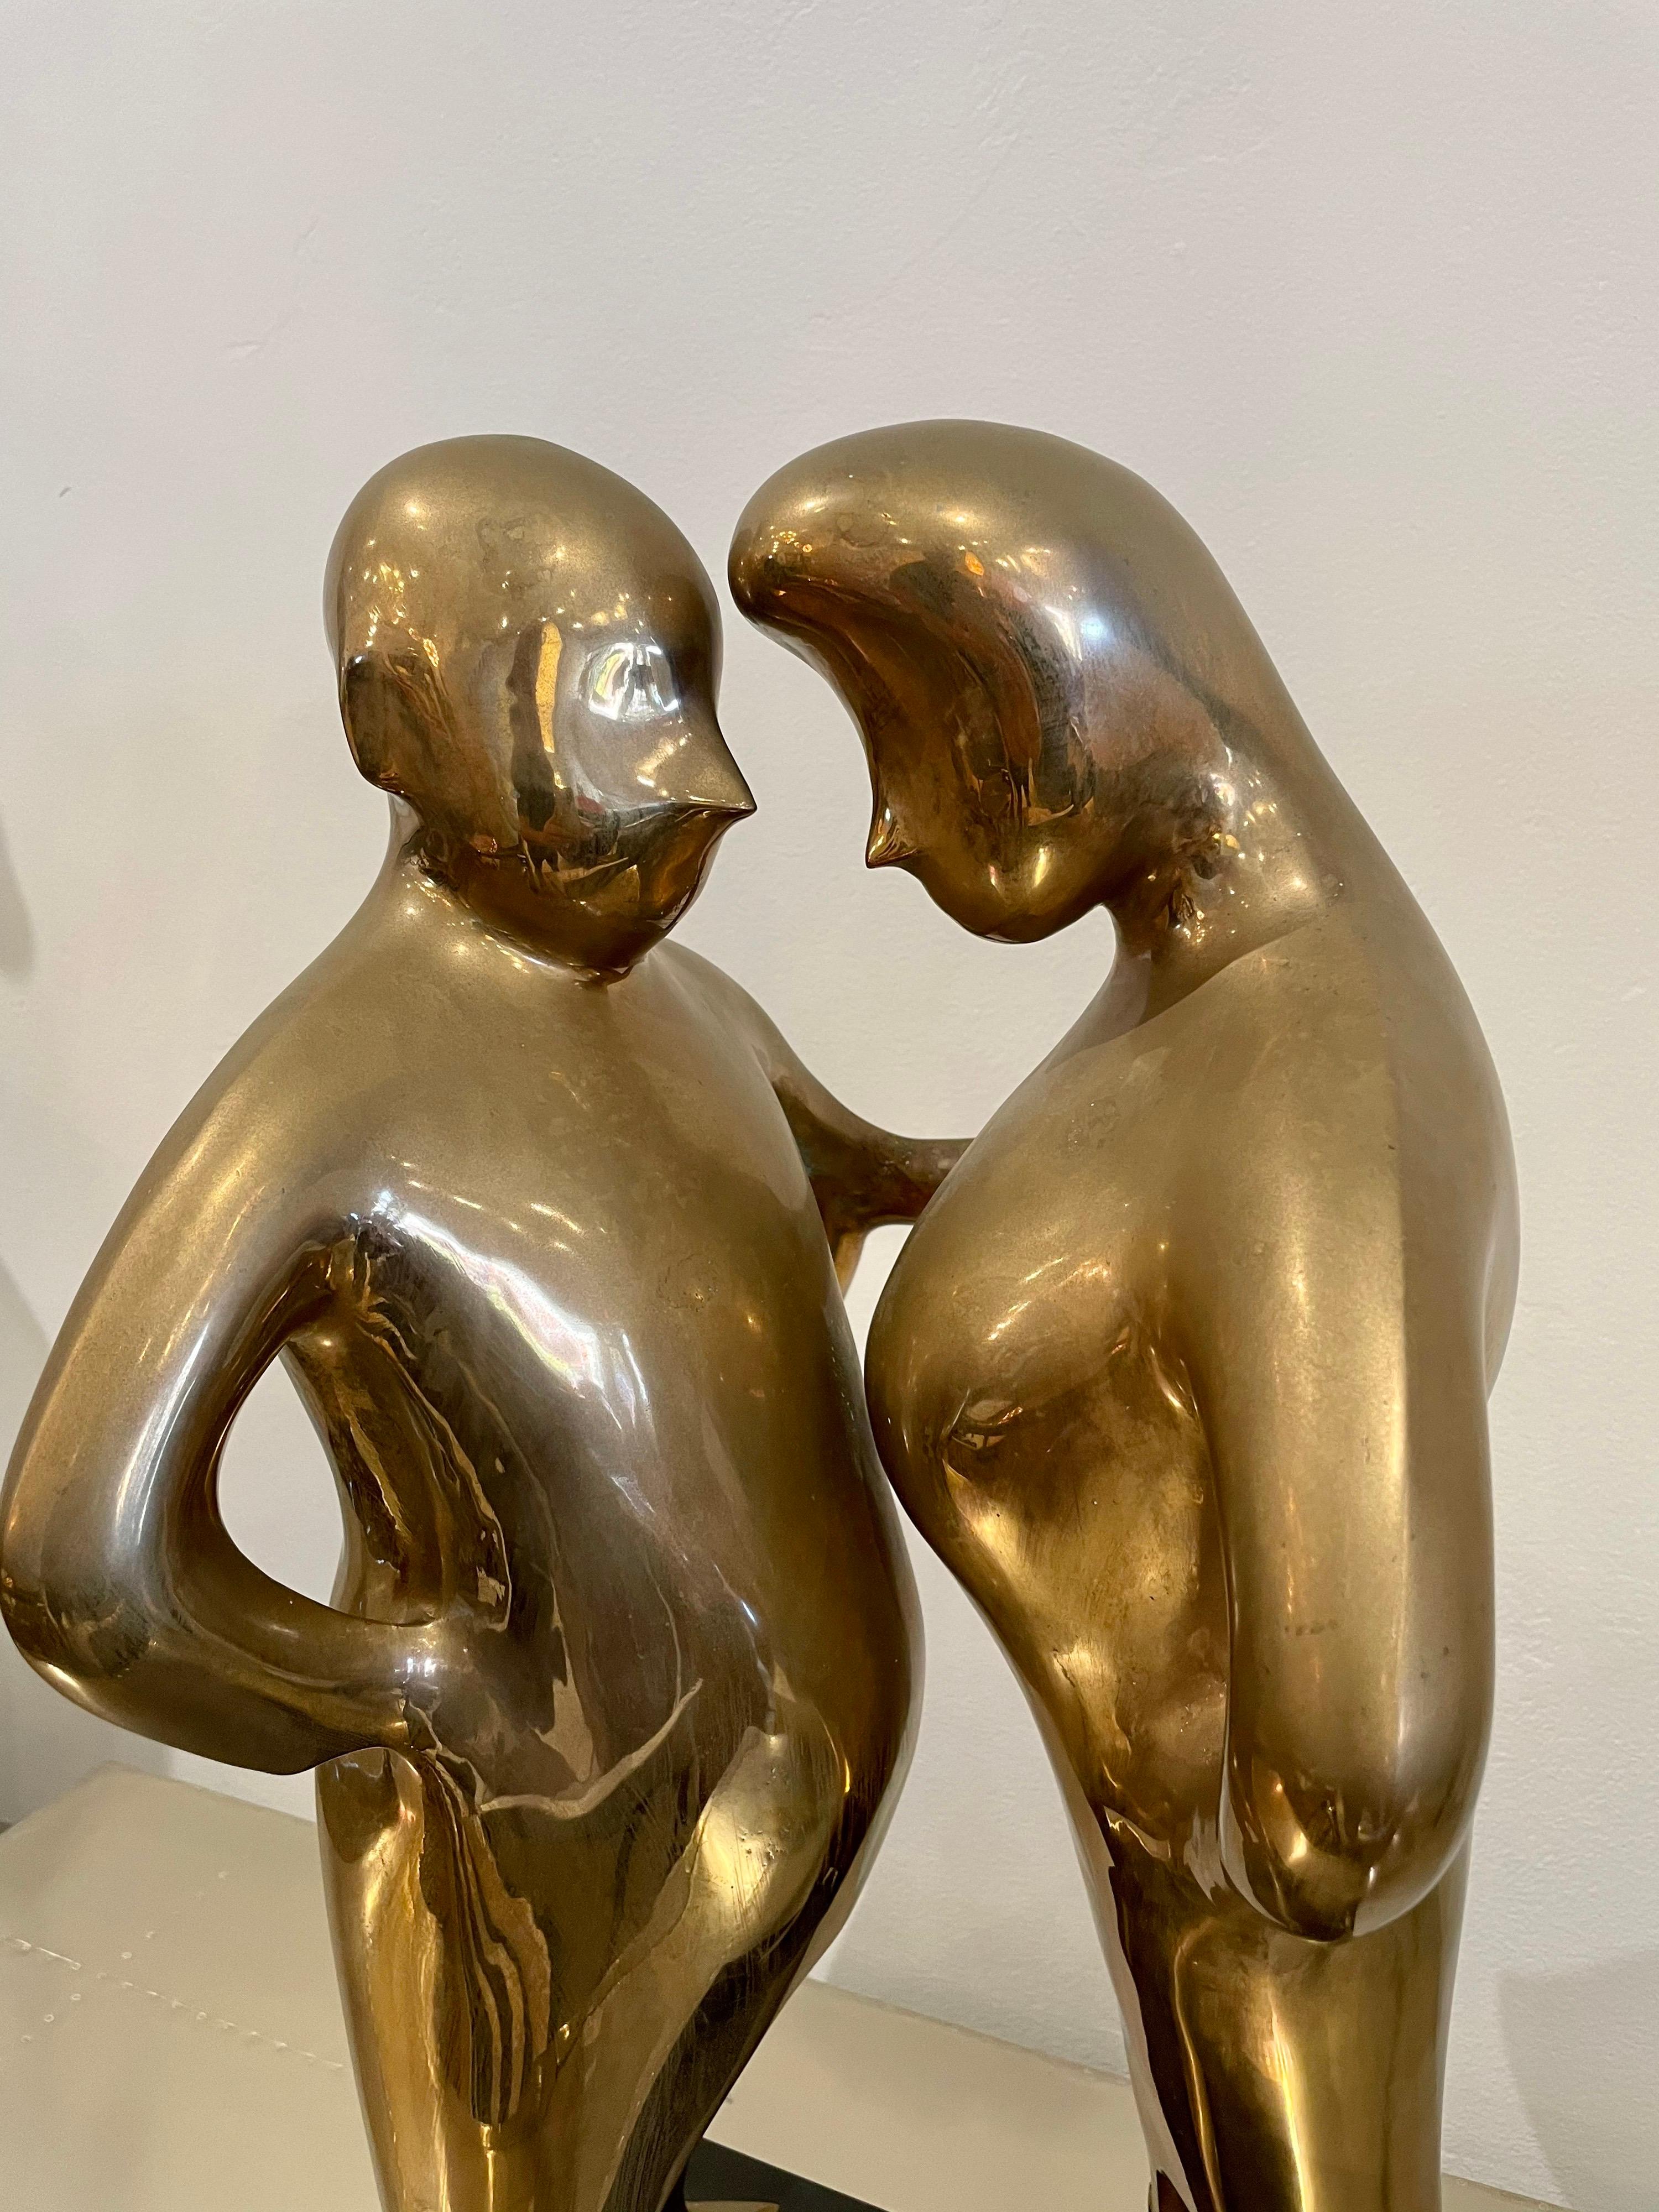 Harry Marinsky, U.K./American (1909-2008). Bronze sculpture of 2 figures facing each other with small dog at their feet, mounted on black base. Signed and numbered 1M10. Base dimensions only: 10.25